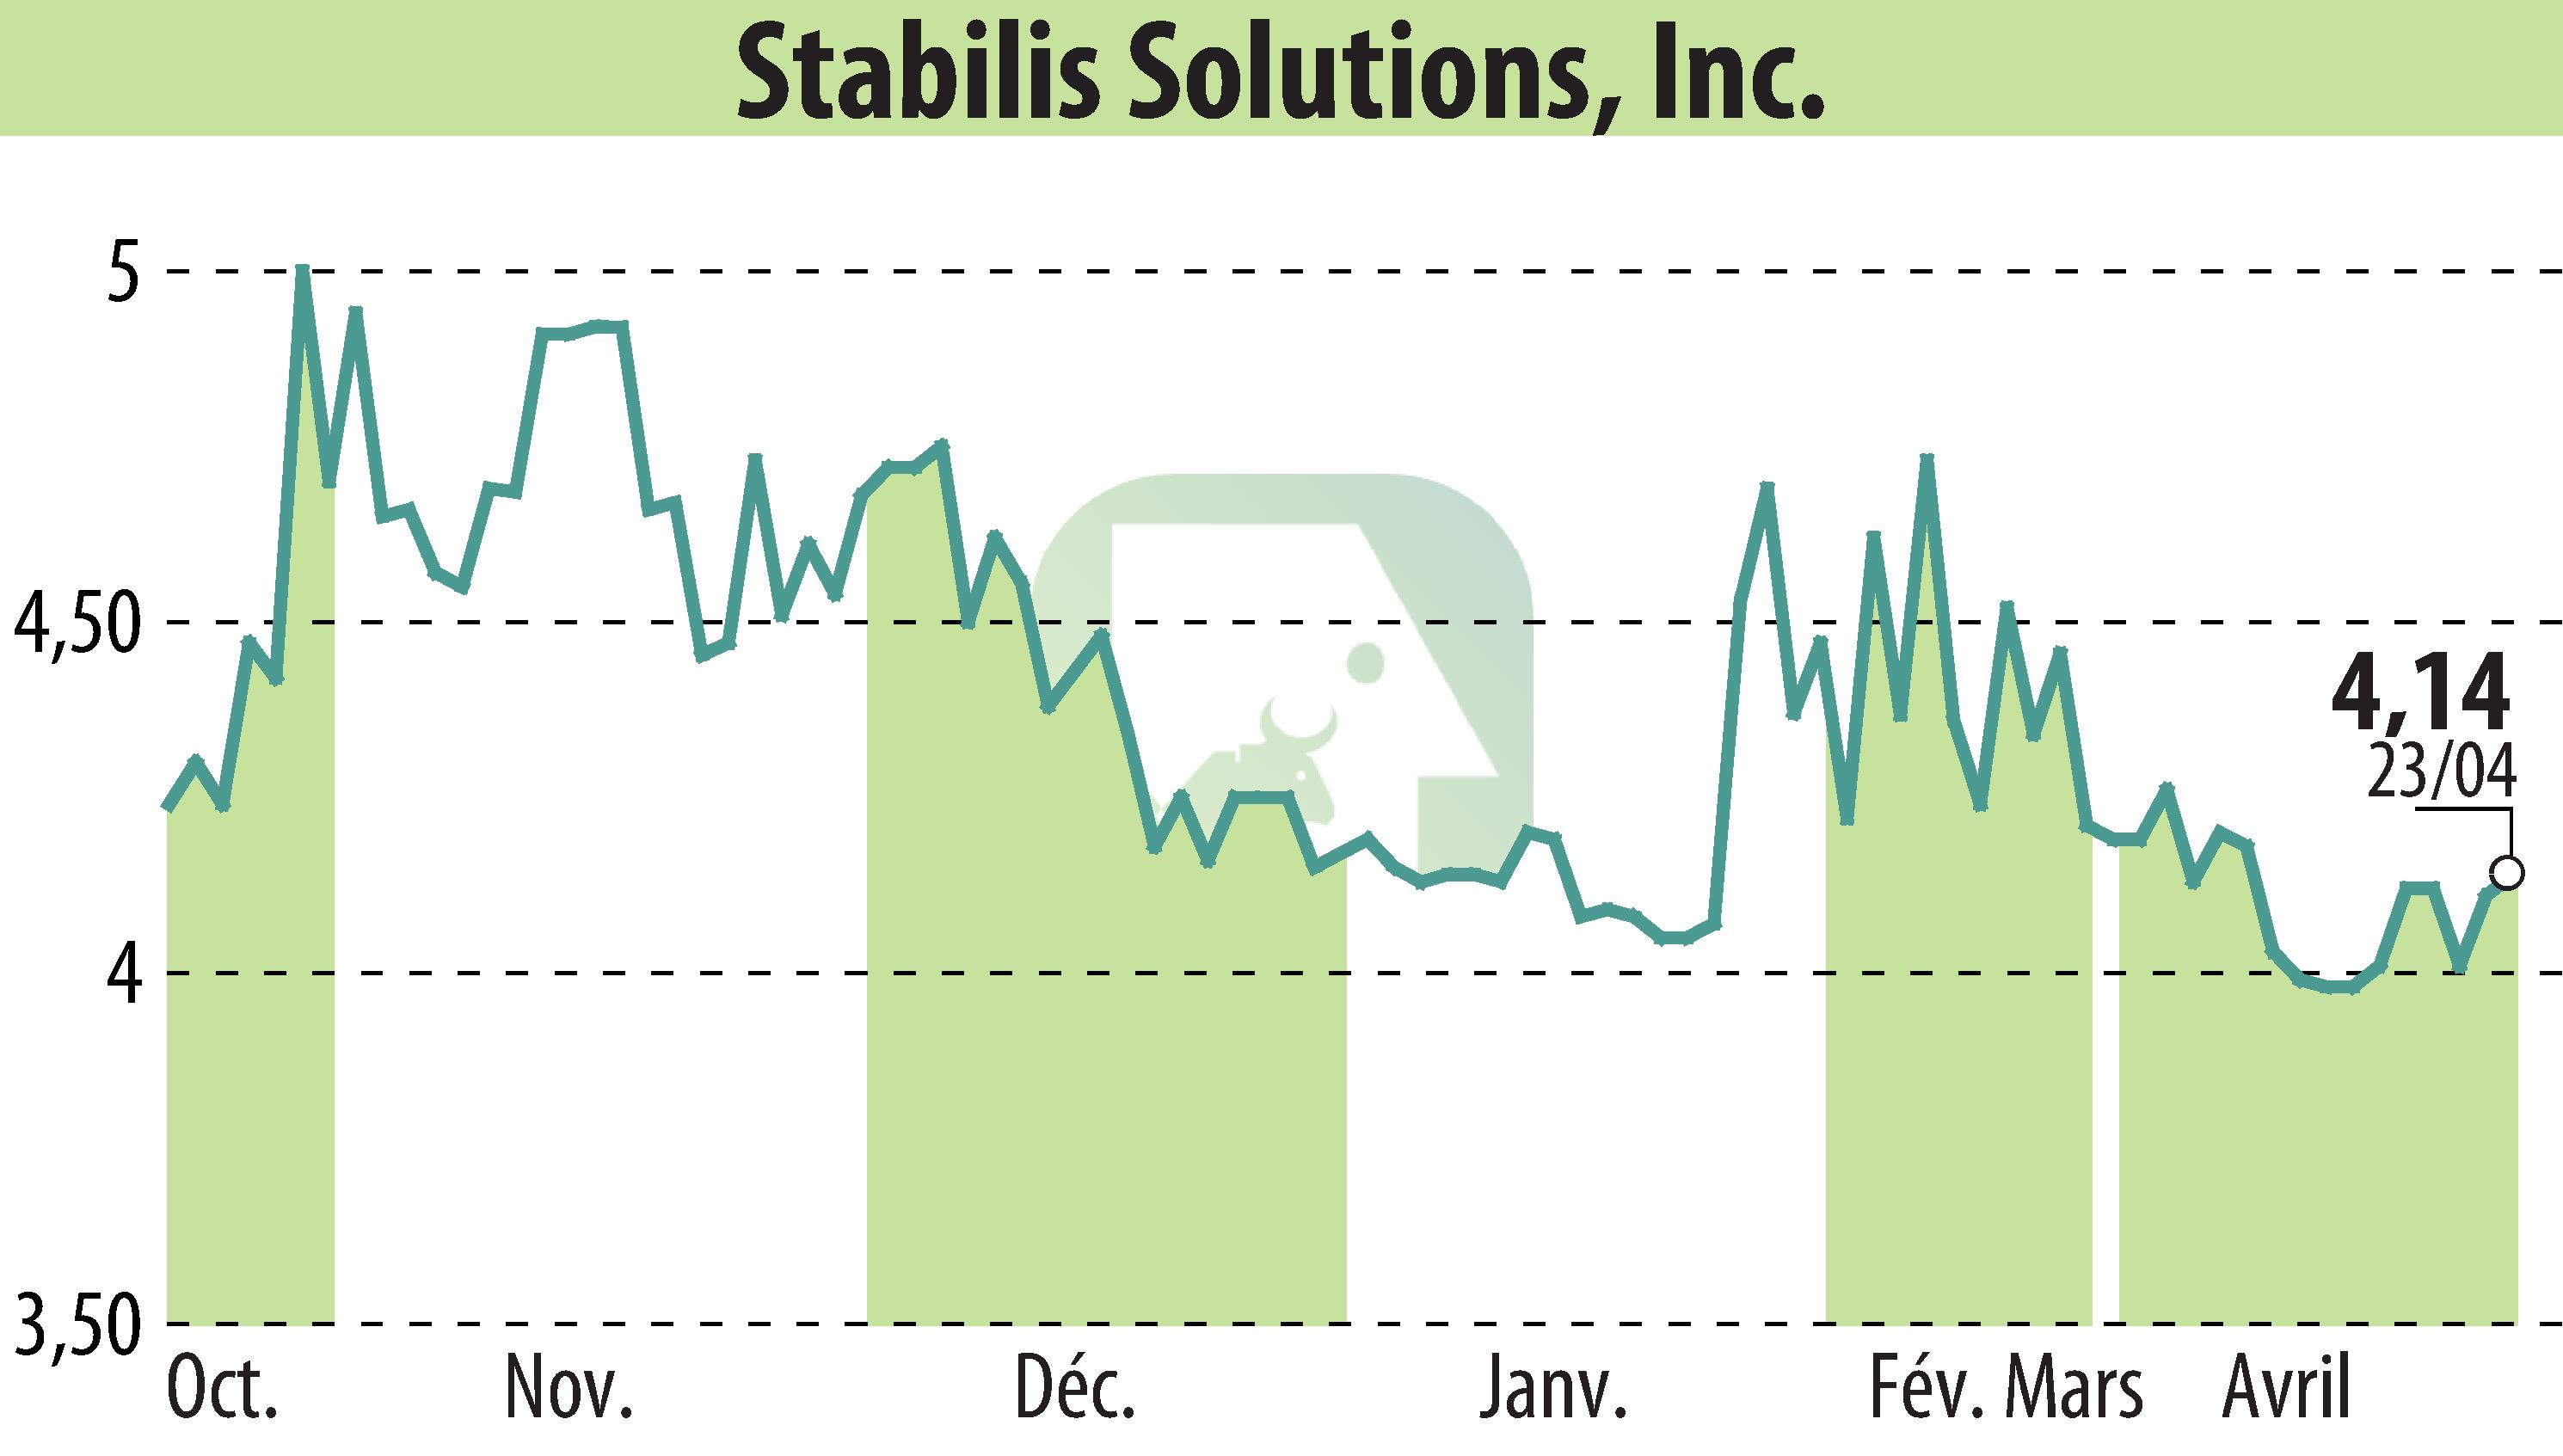 Stock price chart of Stabilis Solutions (EBR:SLNG) showing fluctuations.